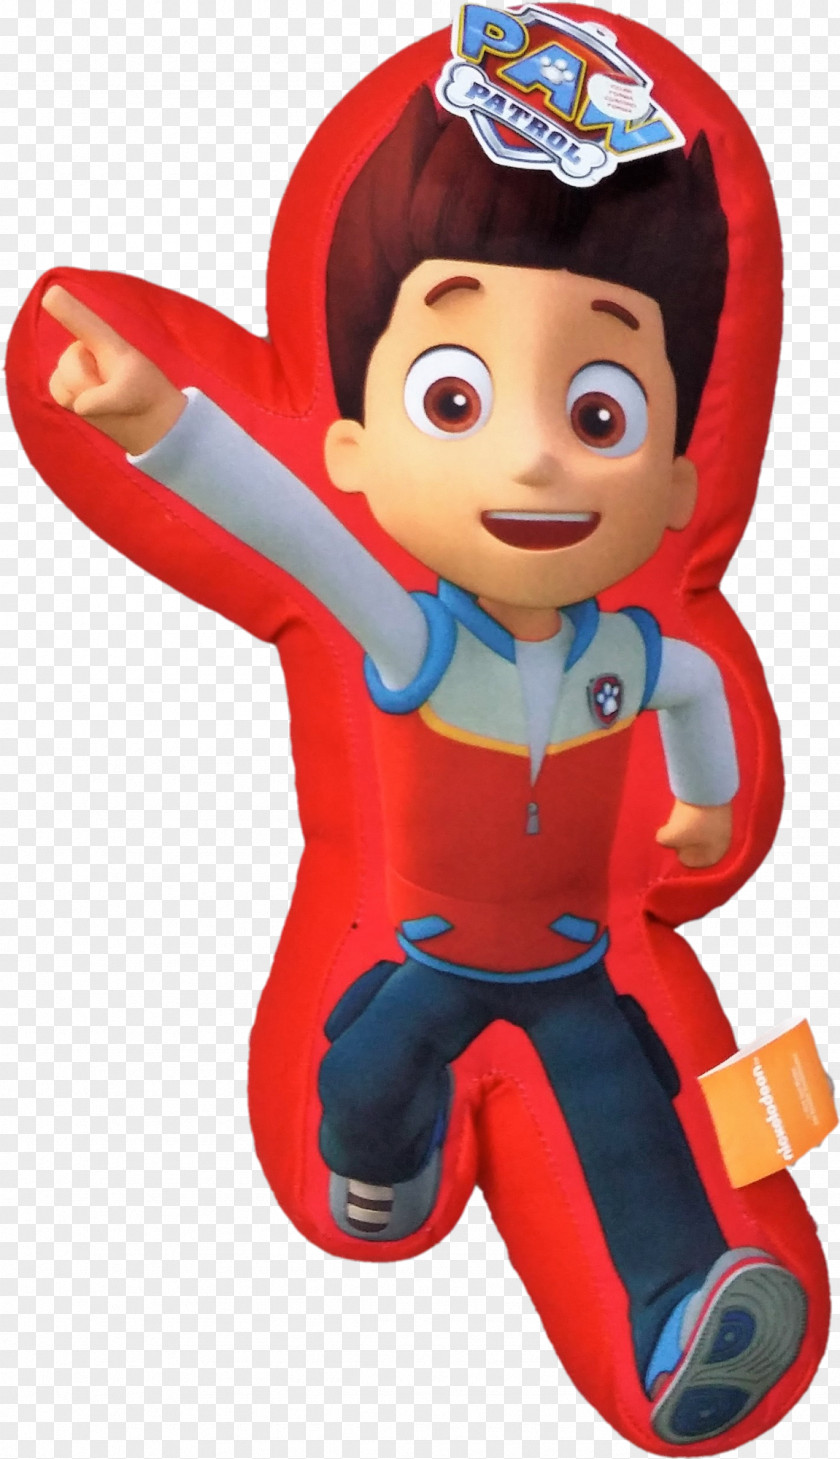 Ryder Paw Patrol PAW Nickelodeon Dog Character PNG